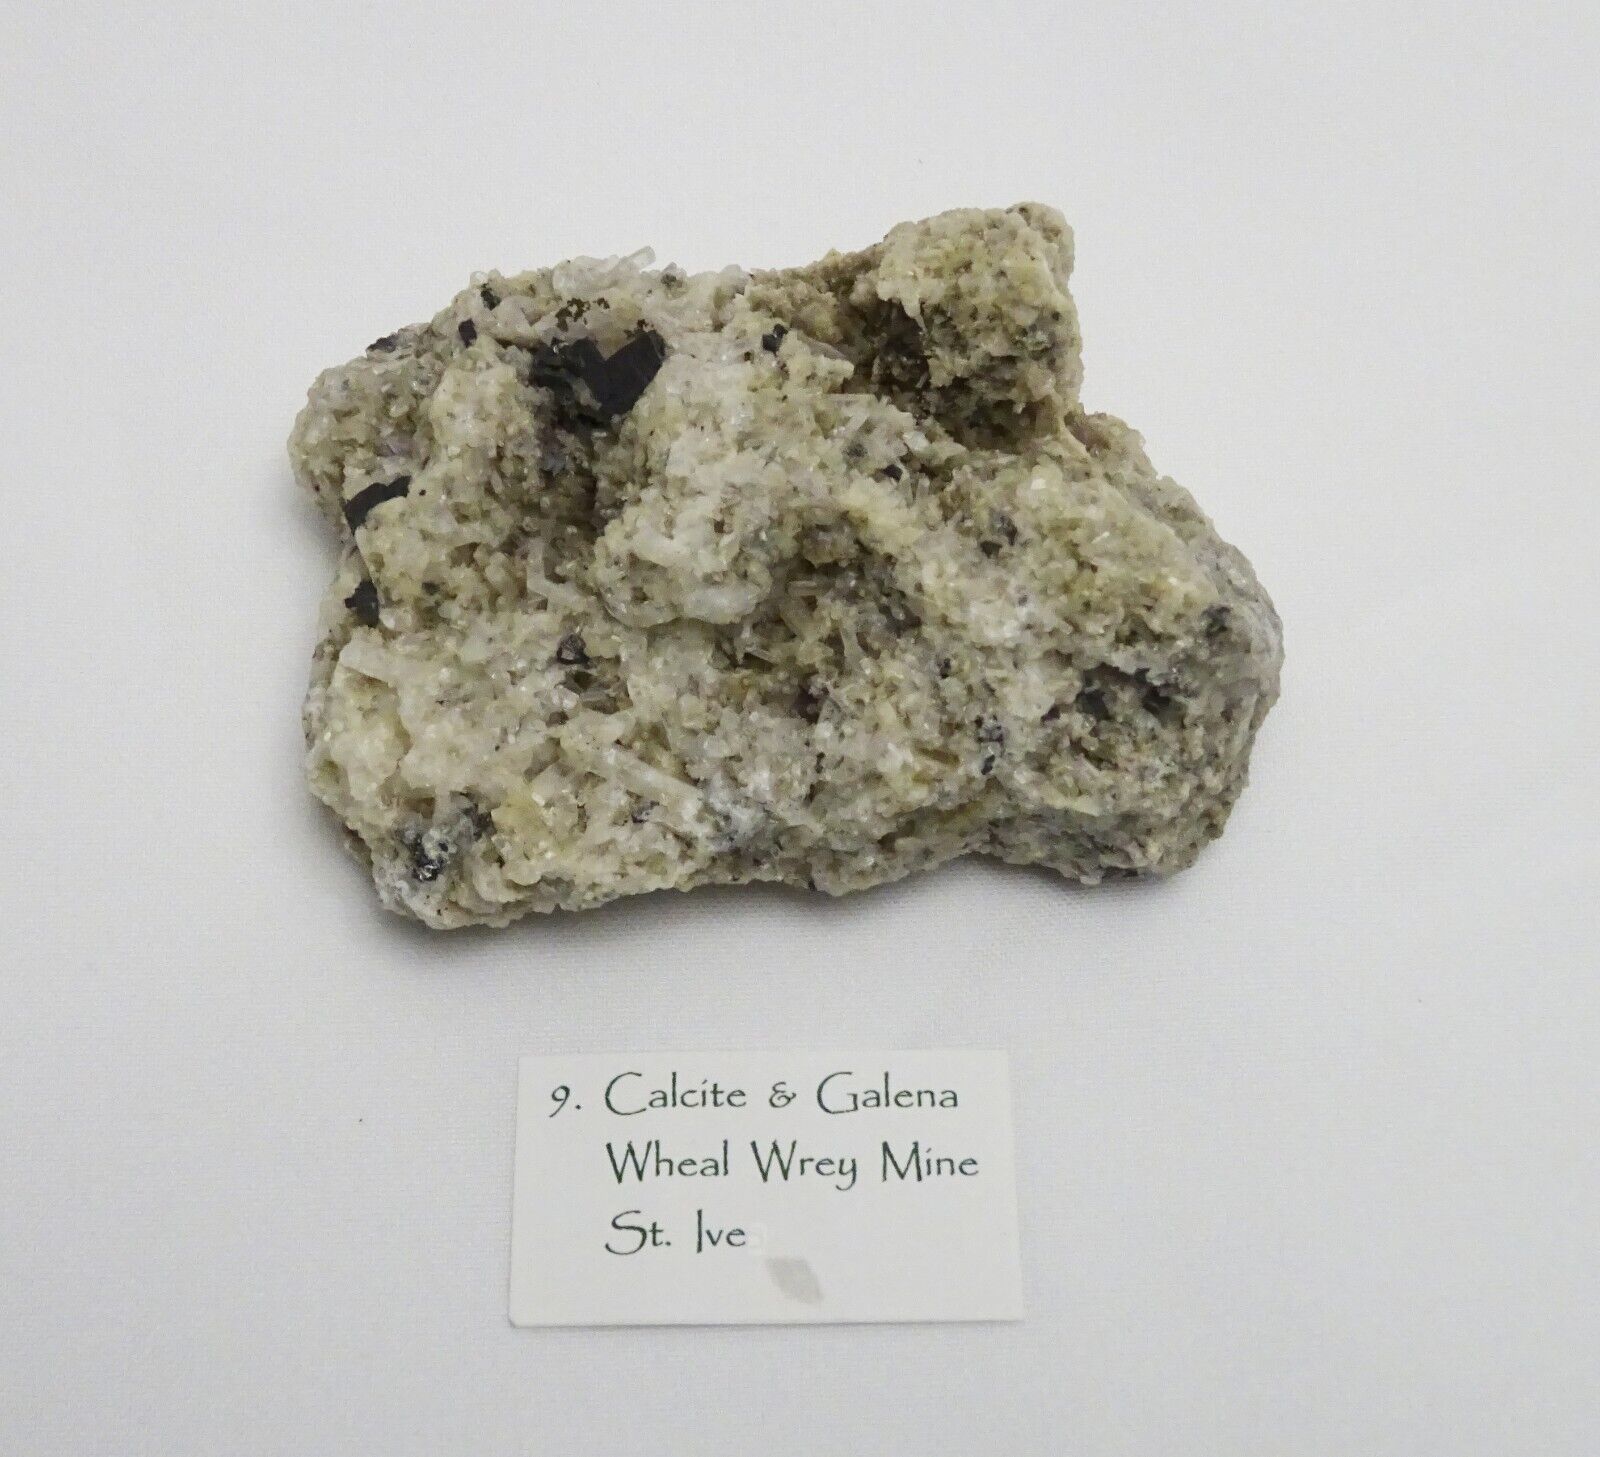 Rare Cornish Calcite and Galena, Wheal Wrey. The Levers Collection, Cornwall UK